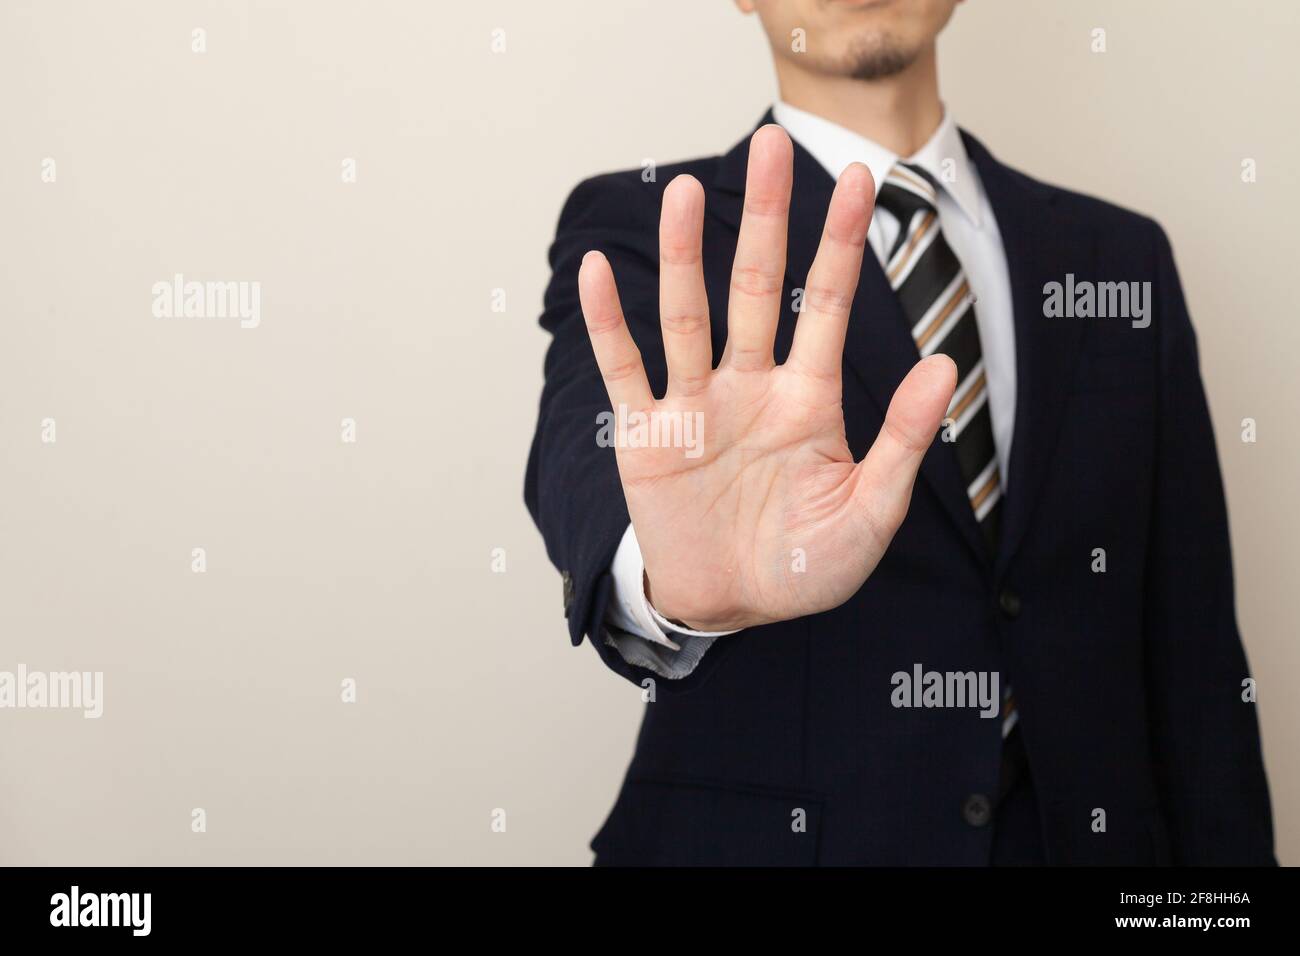 Man in a suit giving a ban, stop hand sign Stock Photo